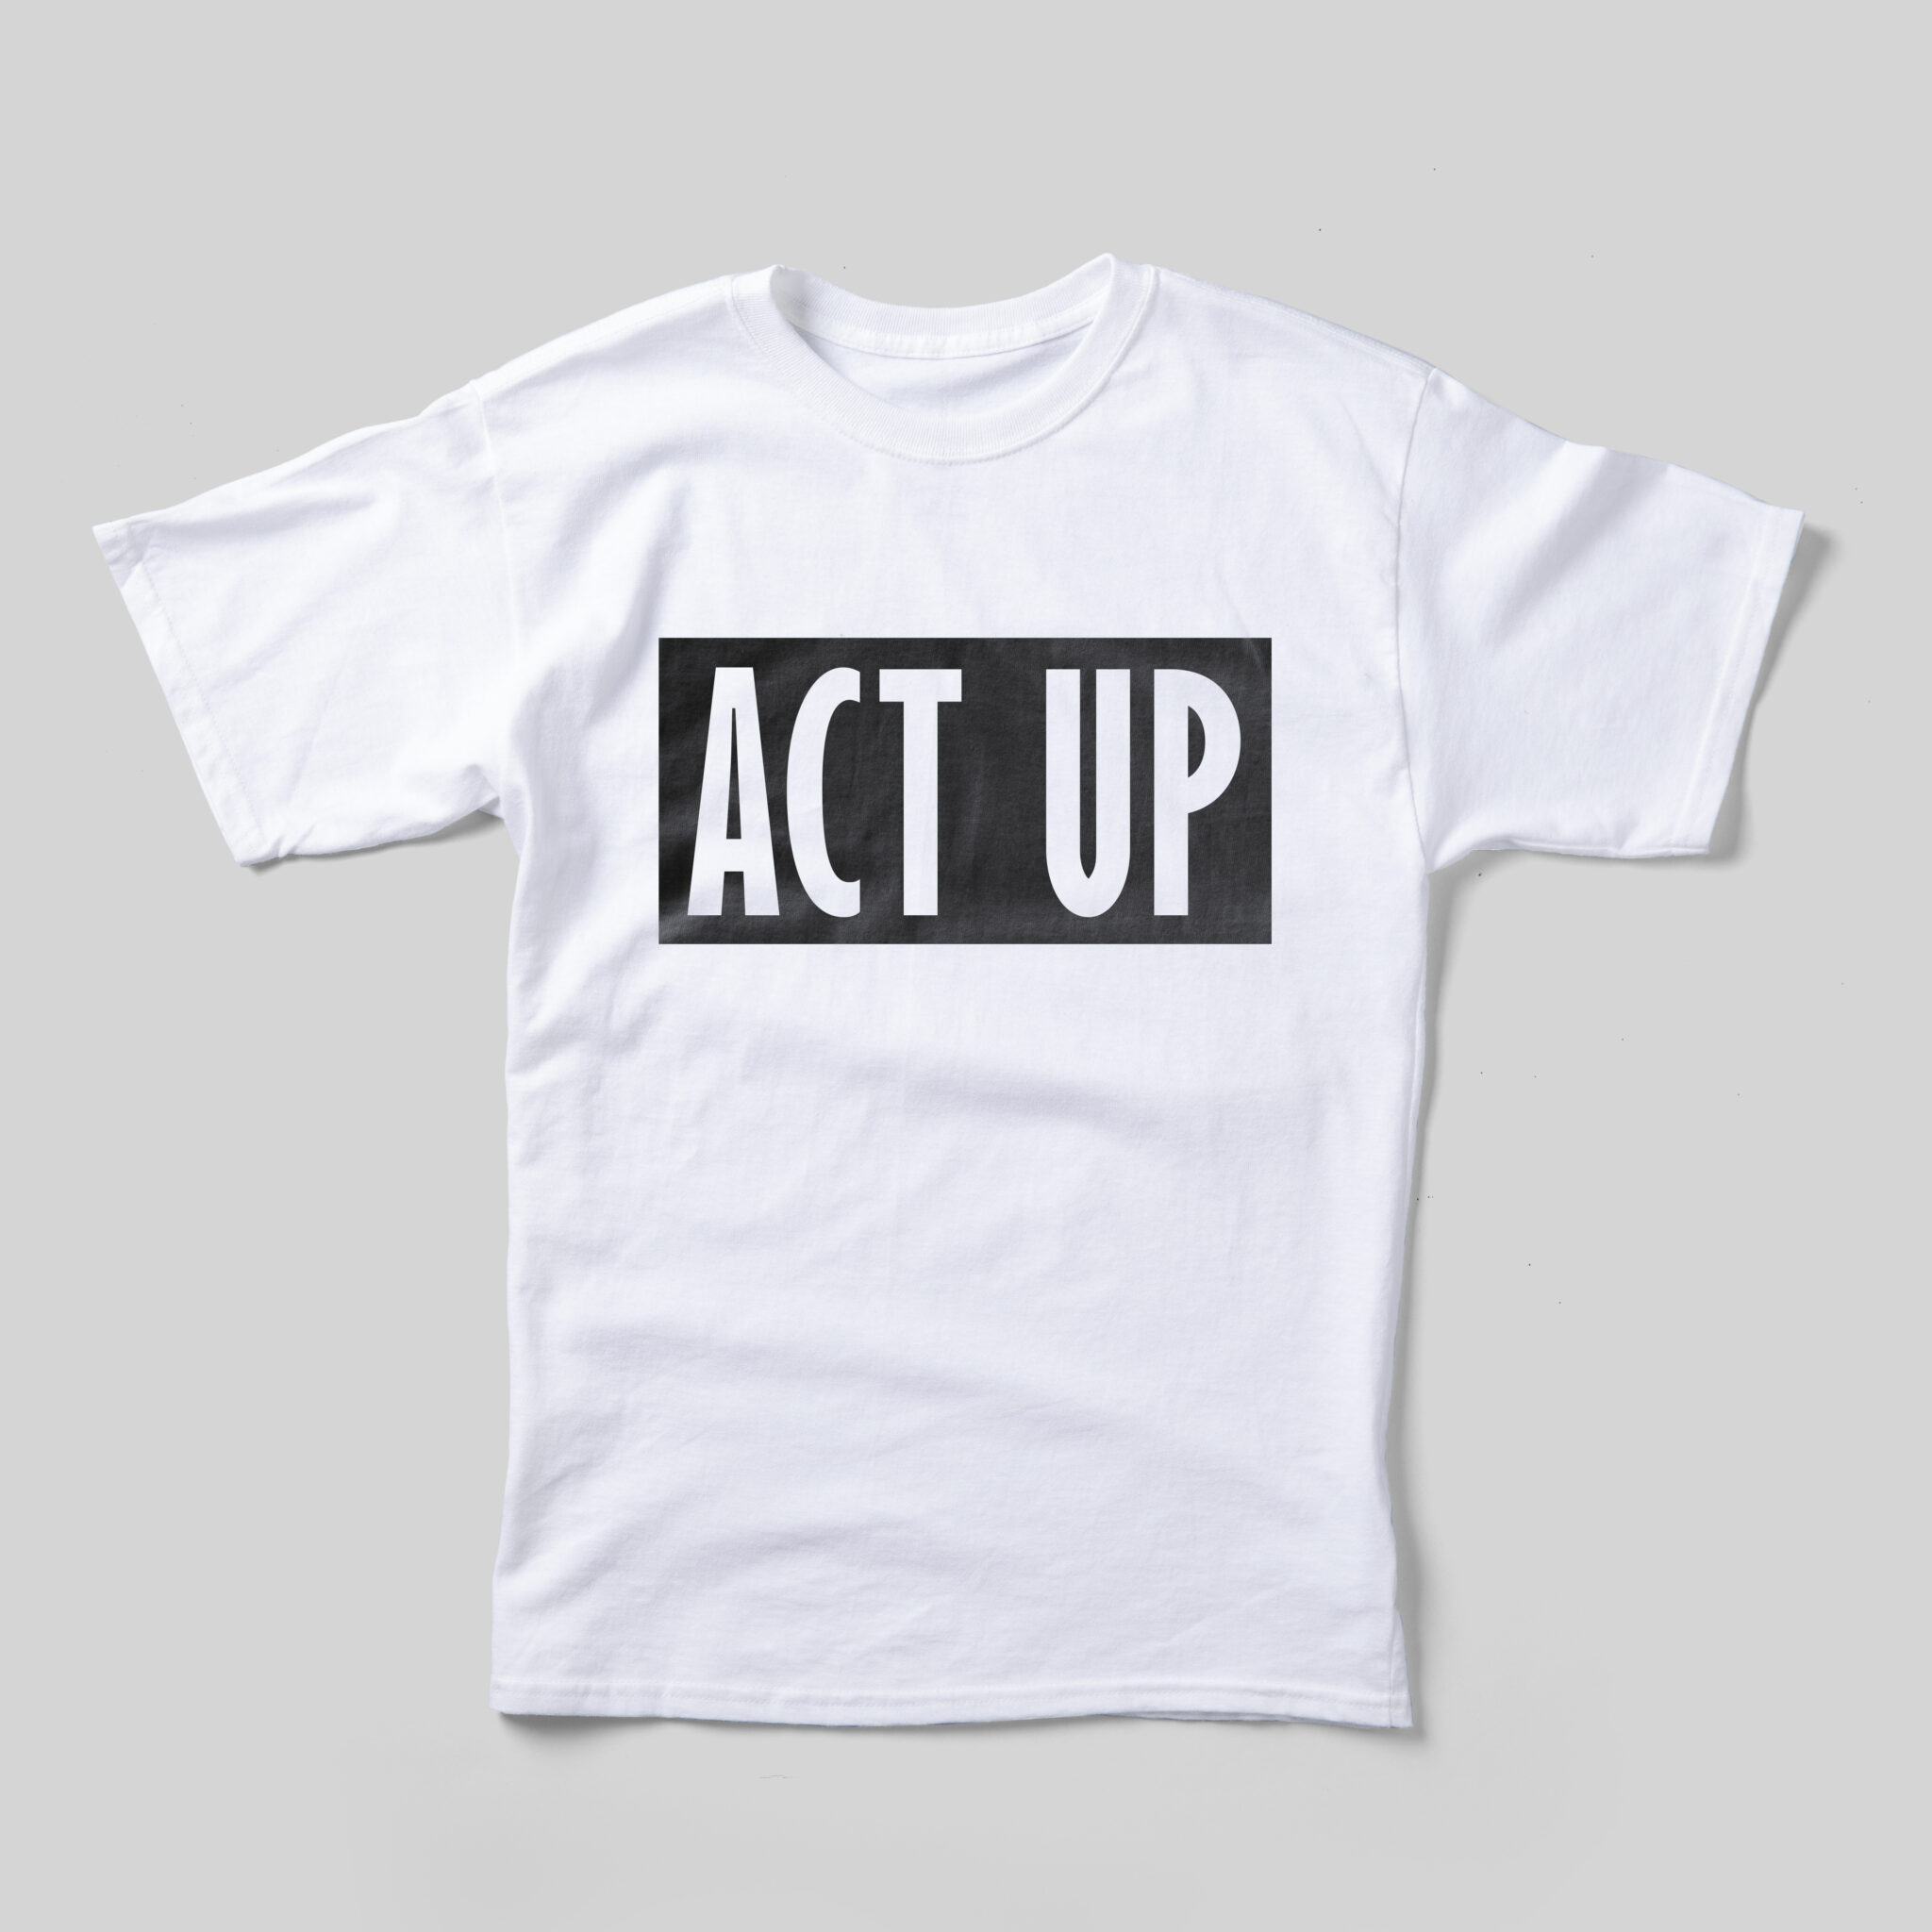 A white t-shirt with the ACT UP logo, which reads "ACT UP" in white, inside of a black box.